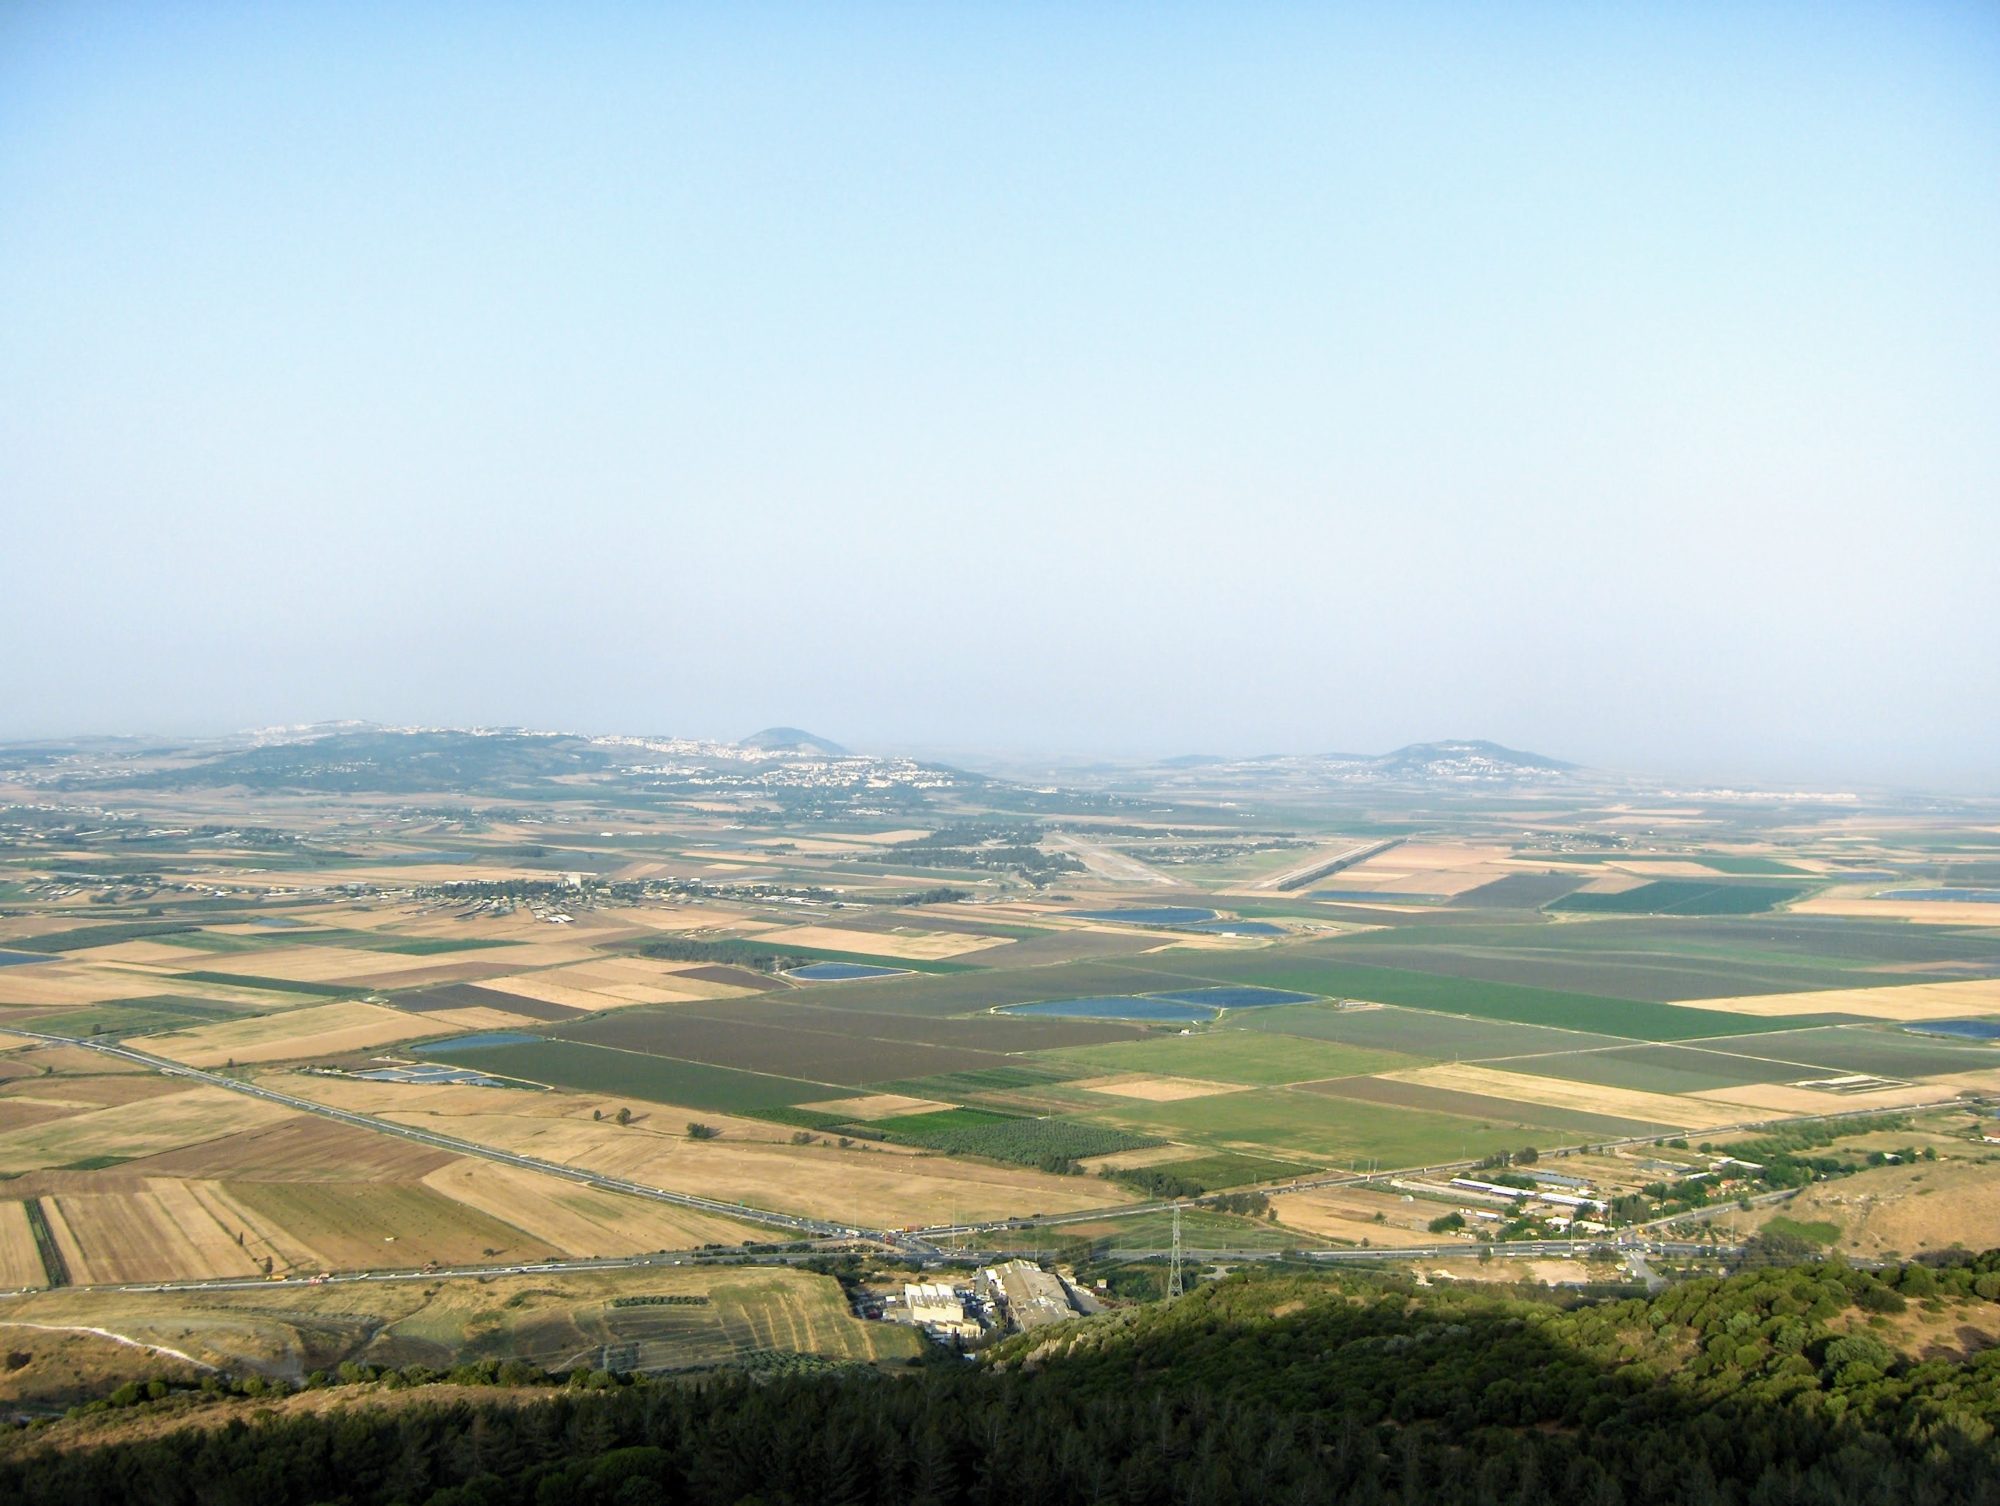 Mounts Tabor and Gilboa as viewed from Mount Carmel